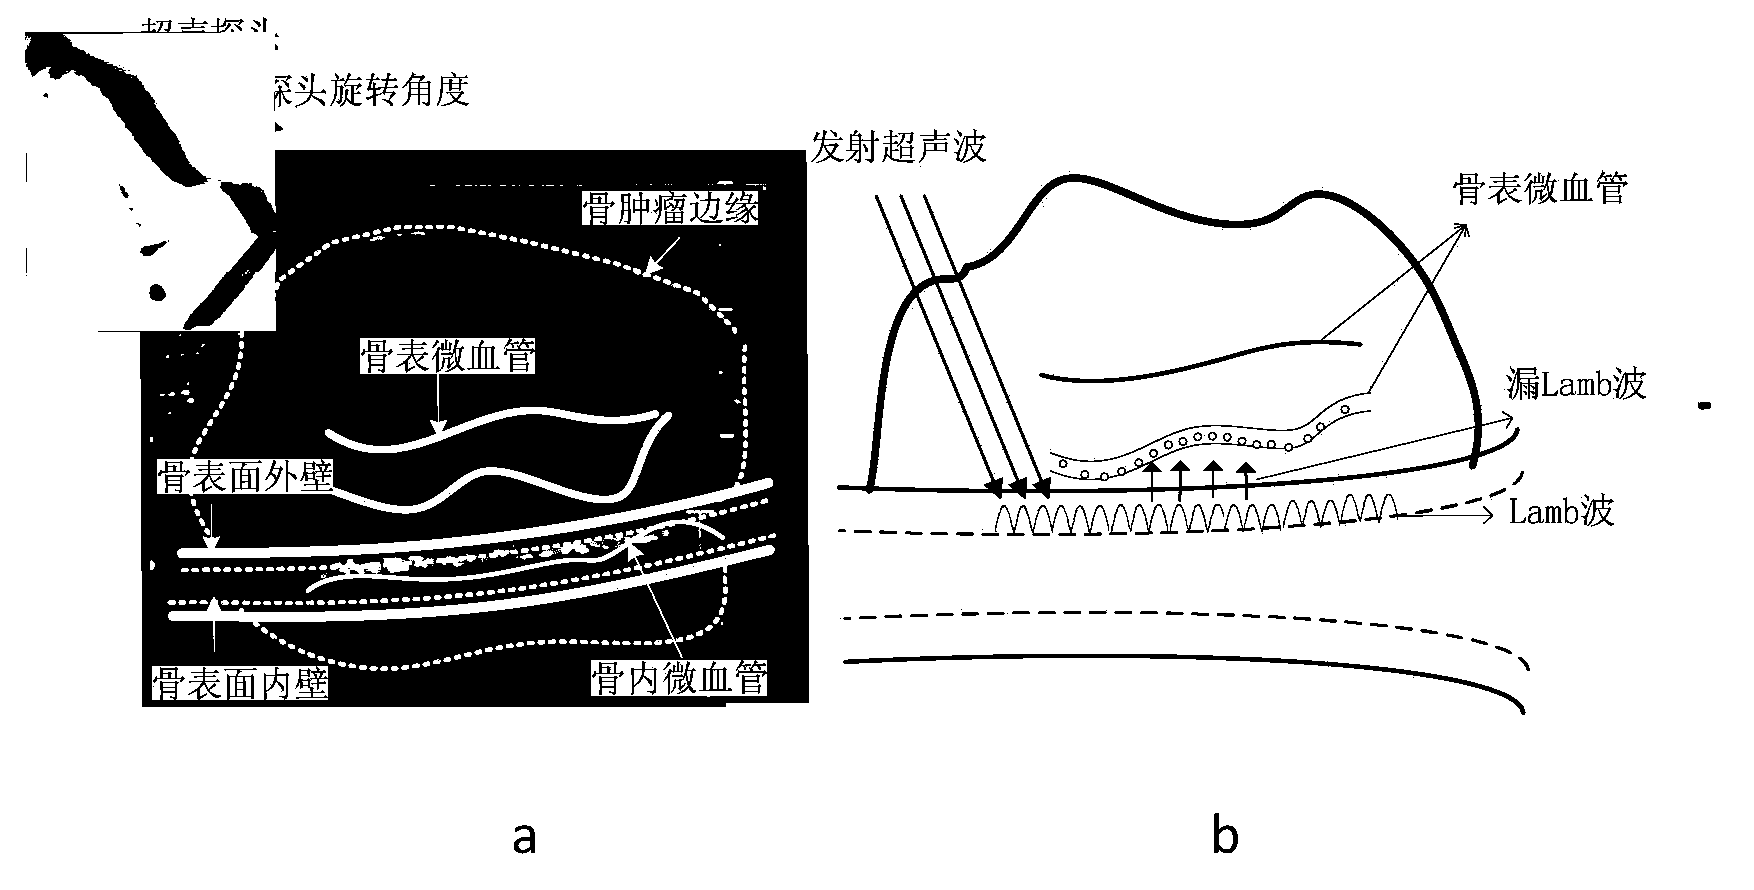 Blood perfusion separation detecting and imaging method for bone surface capillary